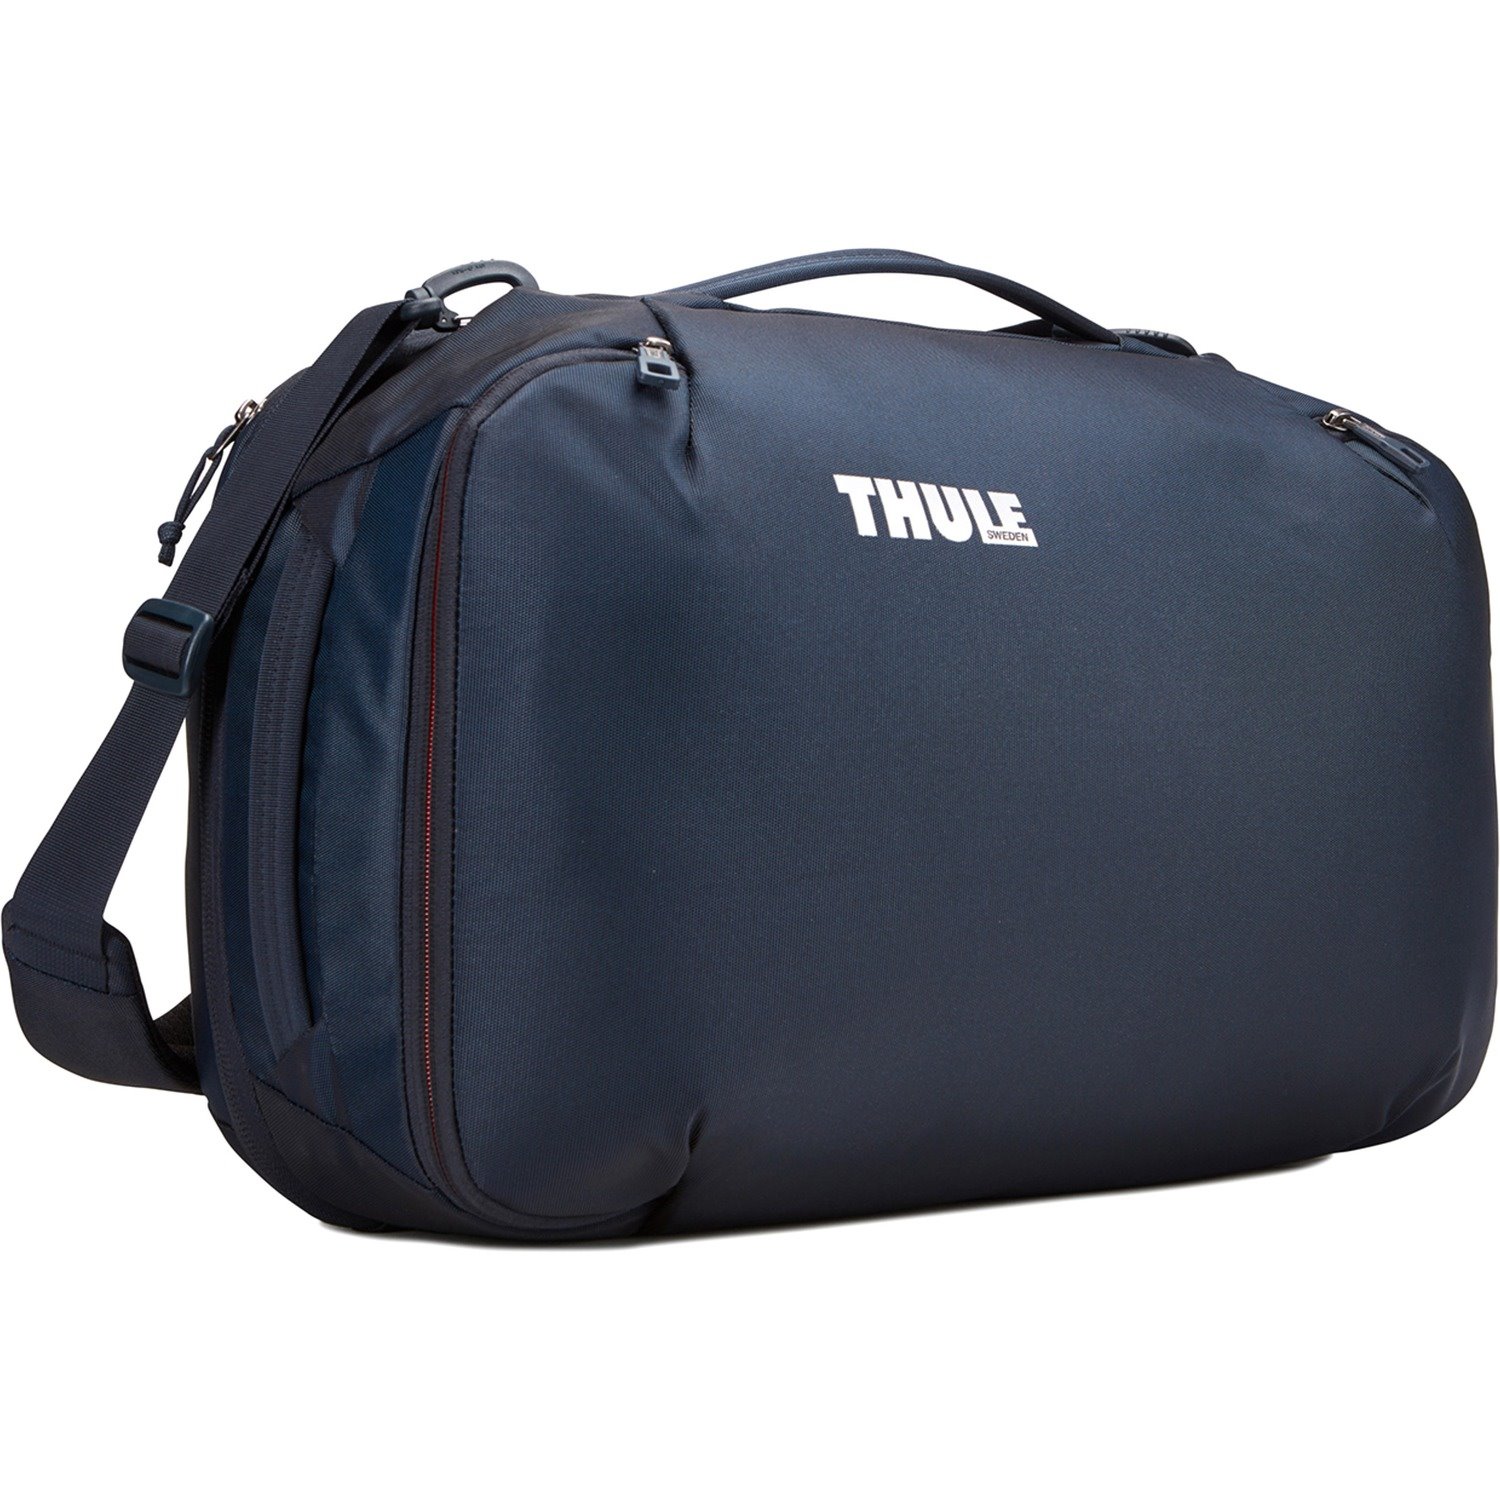 Thule Subterra TSD340 Travel/Luggage Case (Backpack) Travel, Notebook, Tablet PC - Mineral